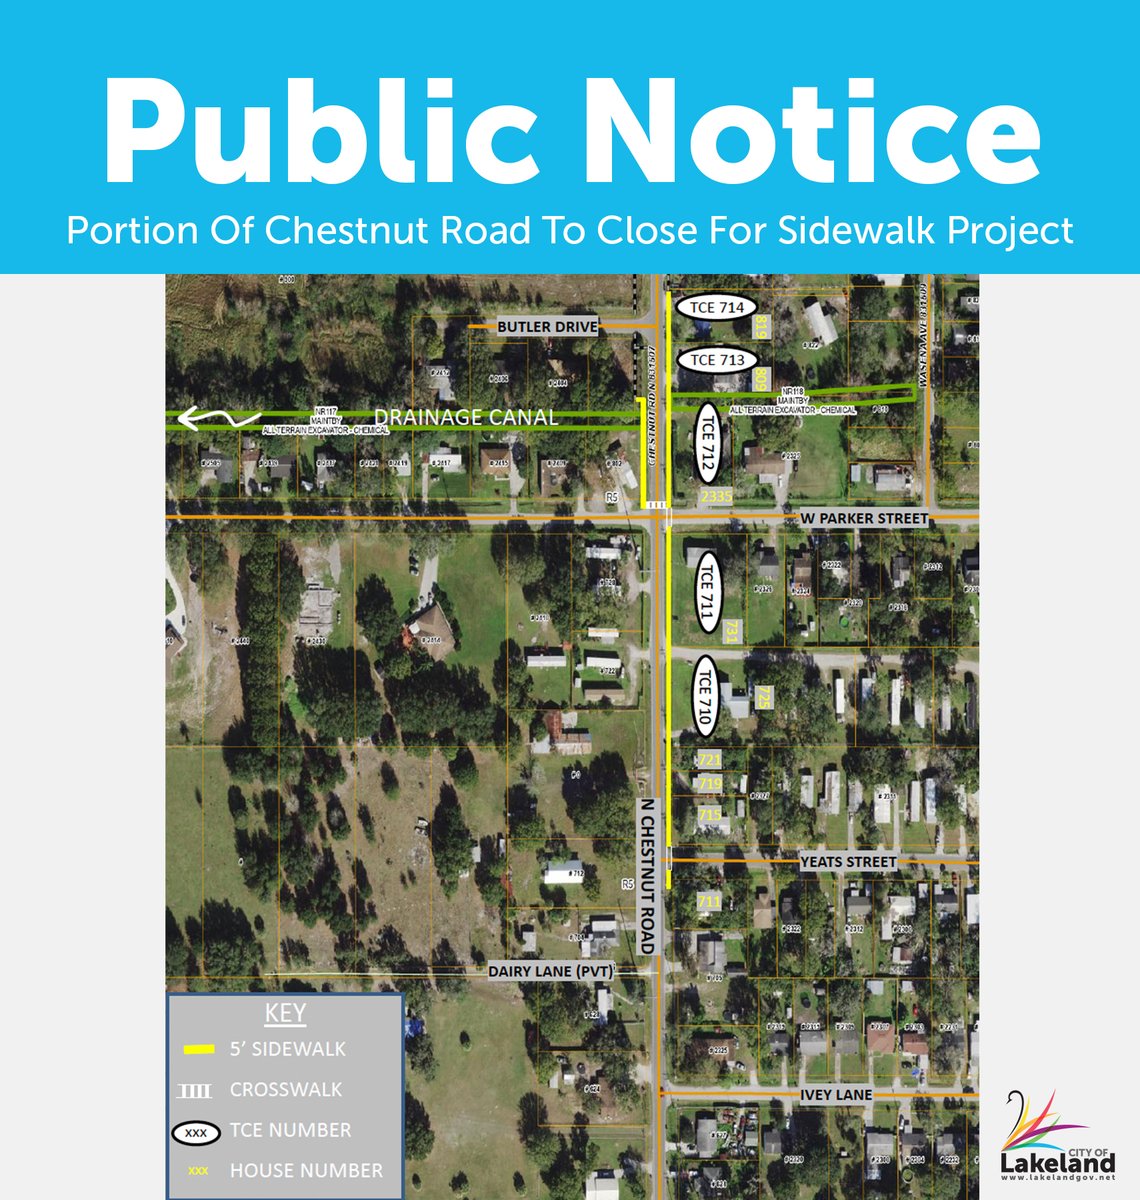 Public Notice: LAKELAND, FL (November 30, 2023) | Portion Of Chestnut Road To Close For Sidewalk Project on 12/10, along North Chestnut Rd from Butler Dr to south of Yeats St. Read the entire Press Release at LakelandGov.net/ChestnutRdClos…